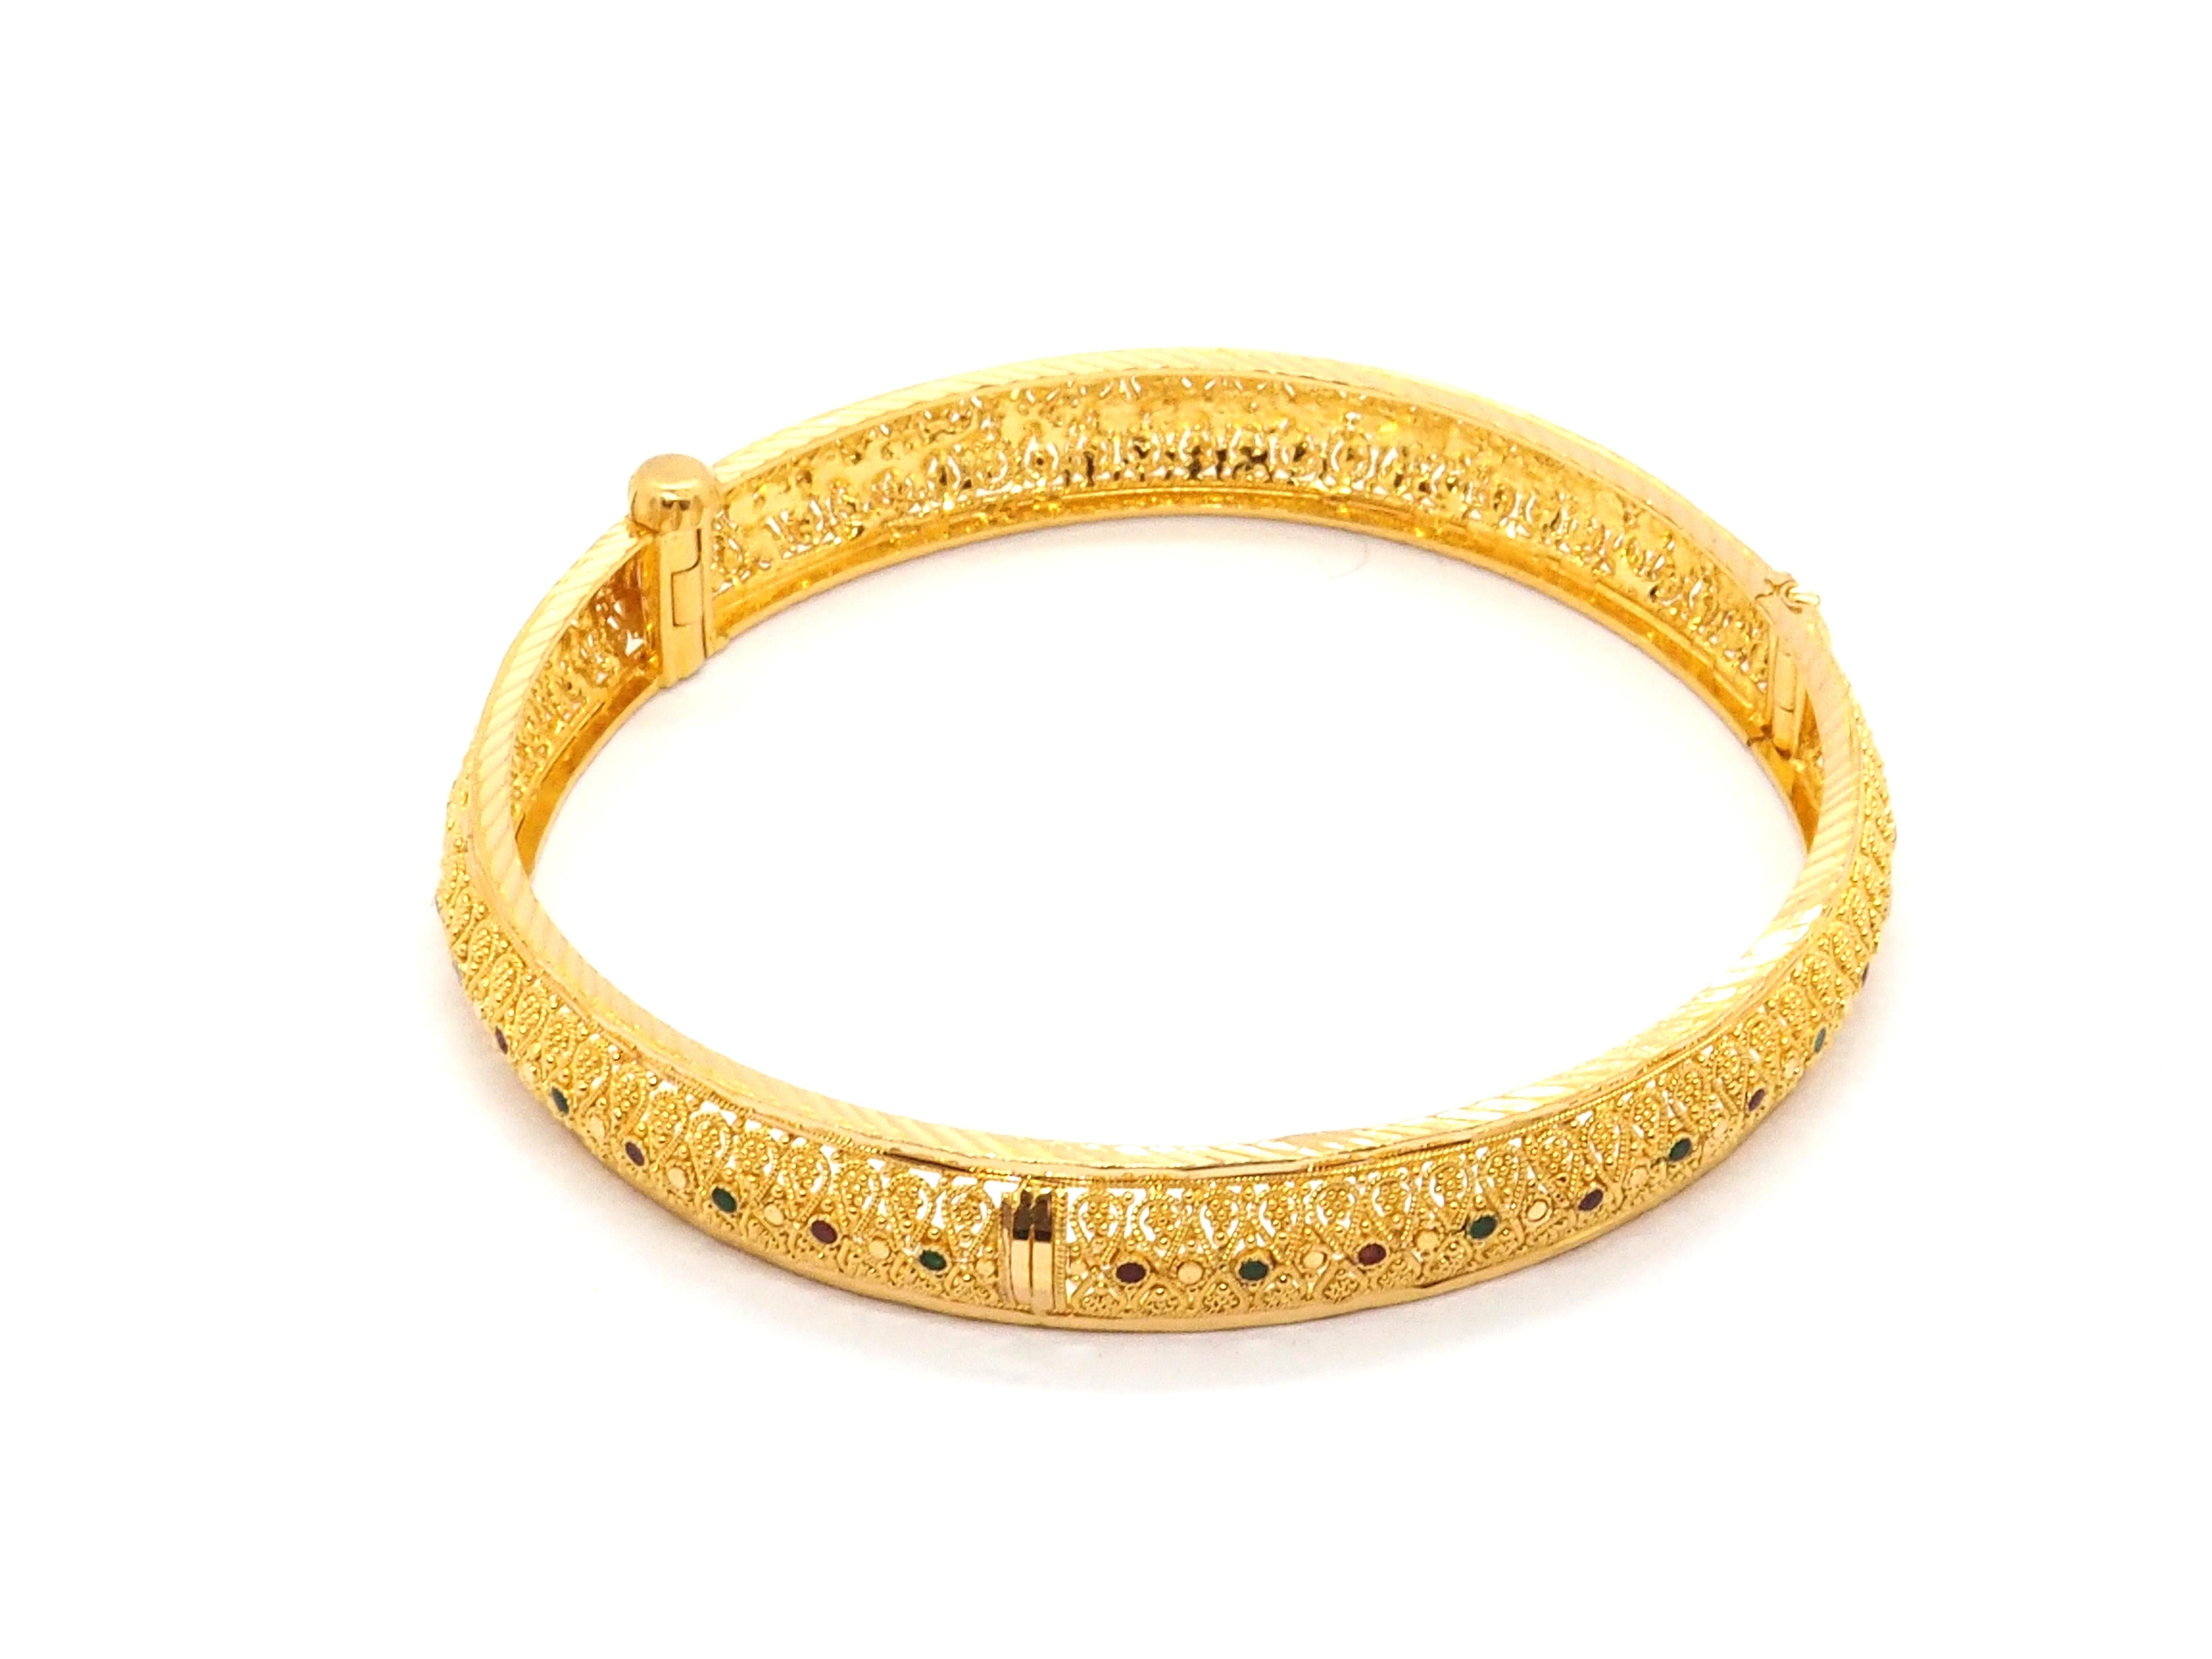 Embrace opulence with our stunning Indian-style bangle bracelet, crafted from 21k gold and adorned with enchanting enamel imitation rubies and emeralds. Weighing 25 grams, this exquisite piece radiates luxury and elegance, offering a timeless